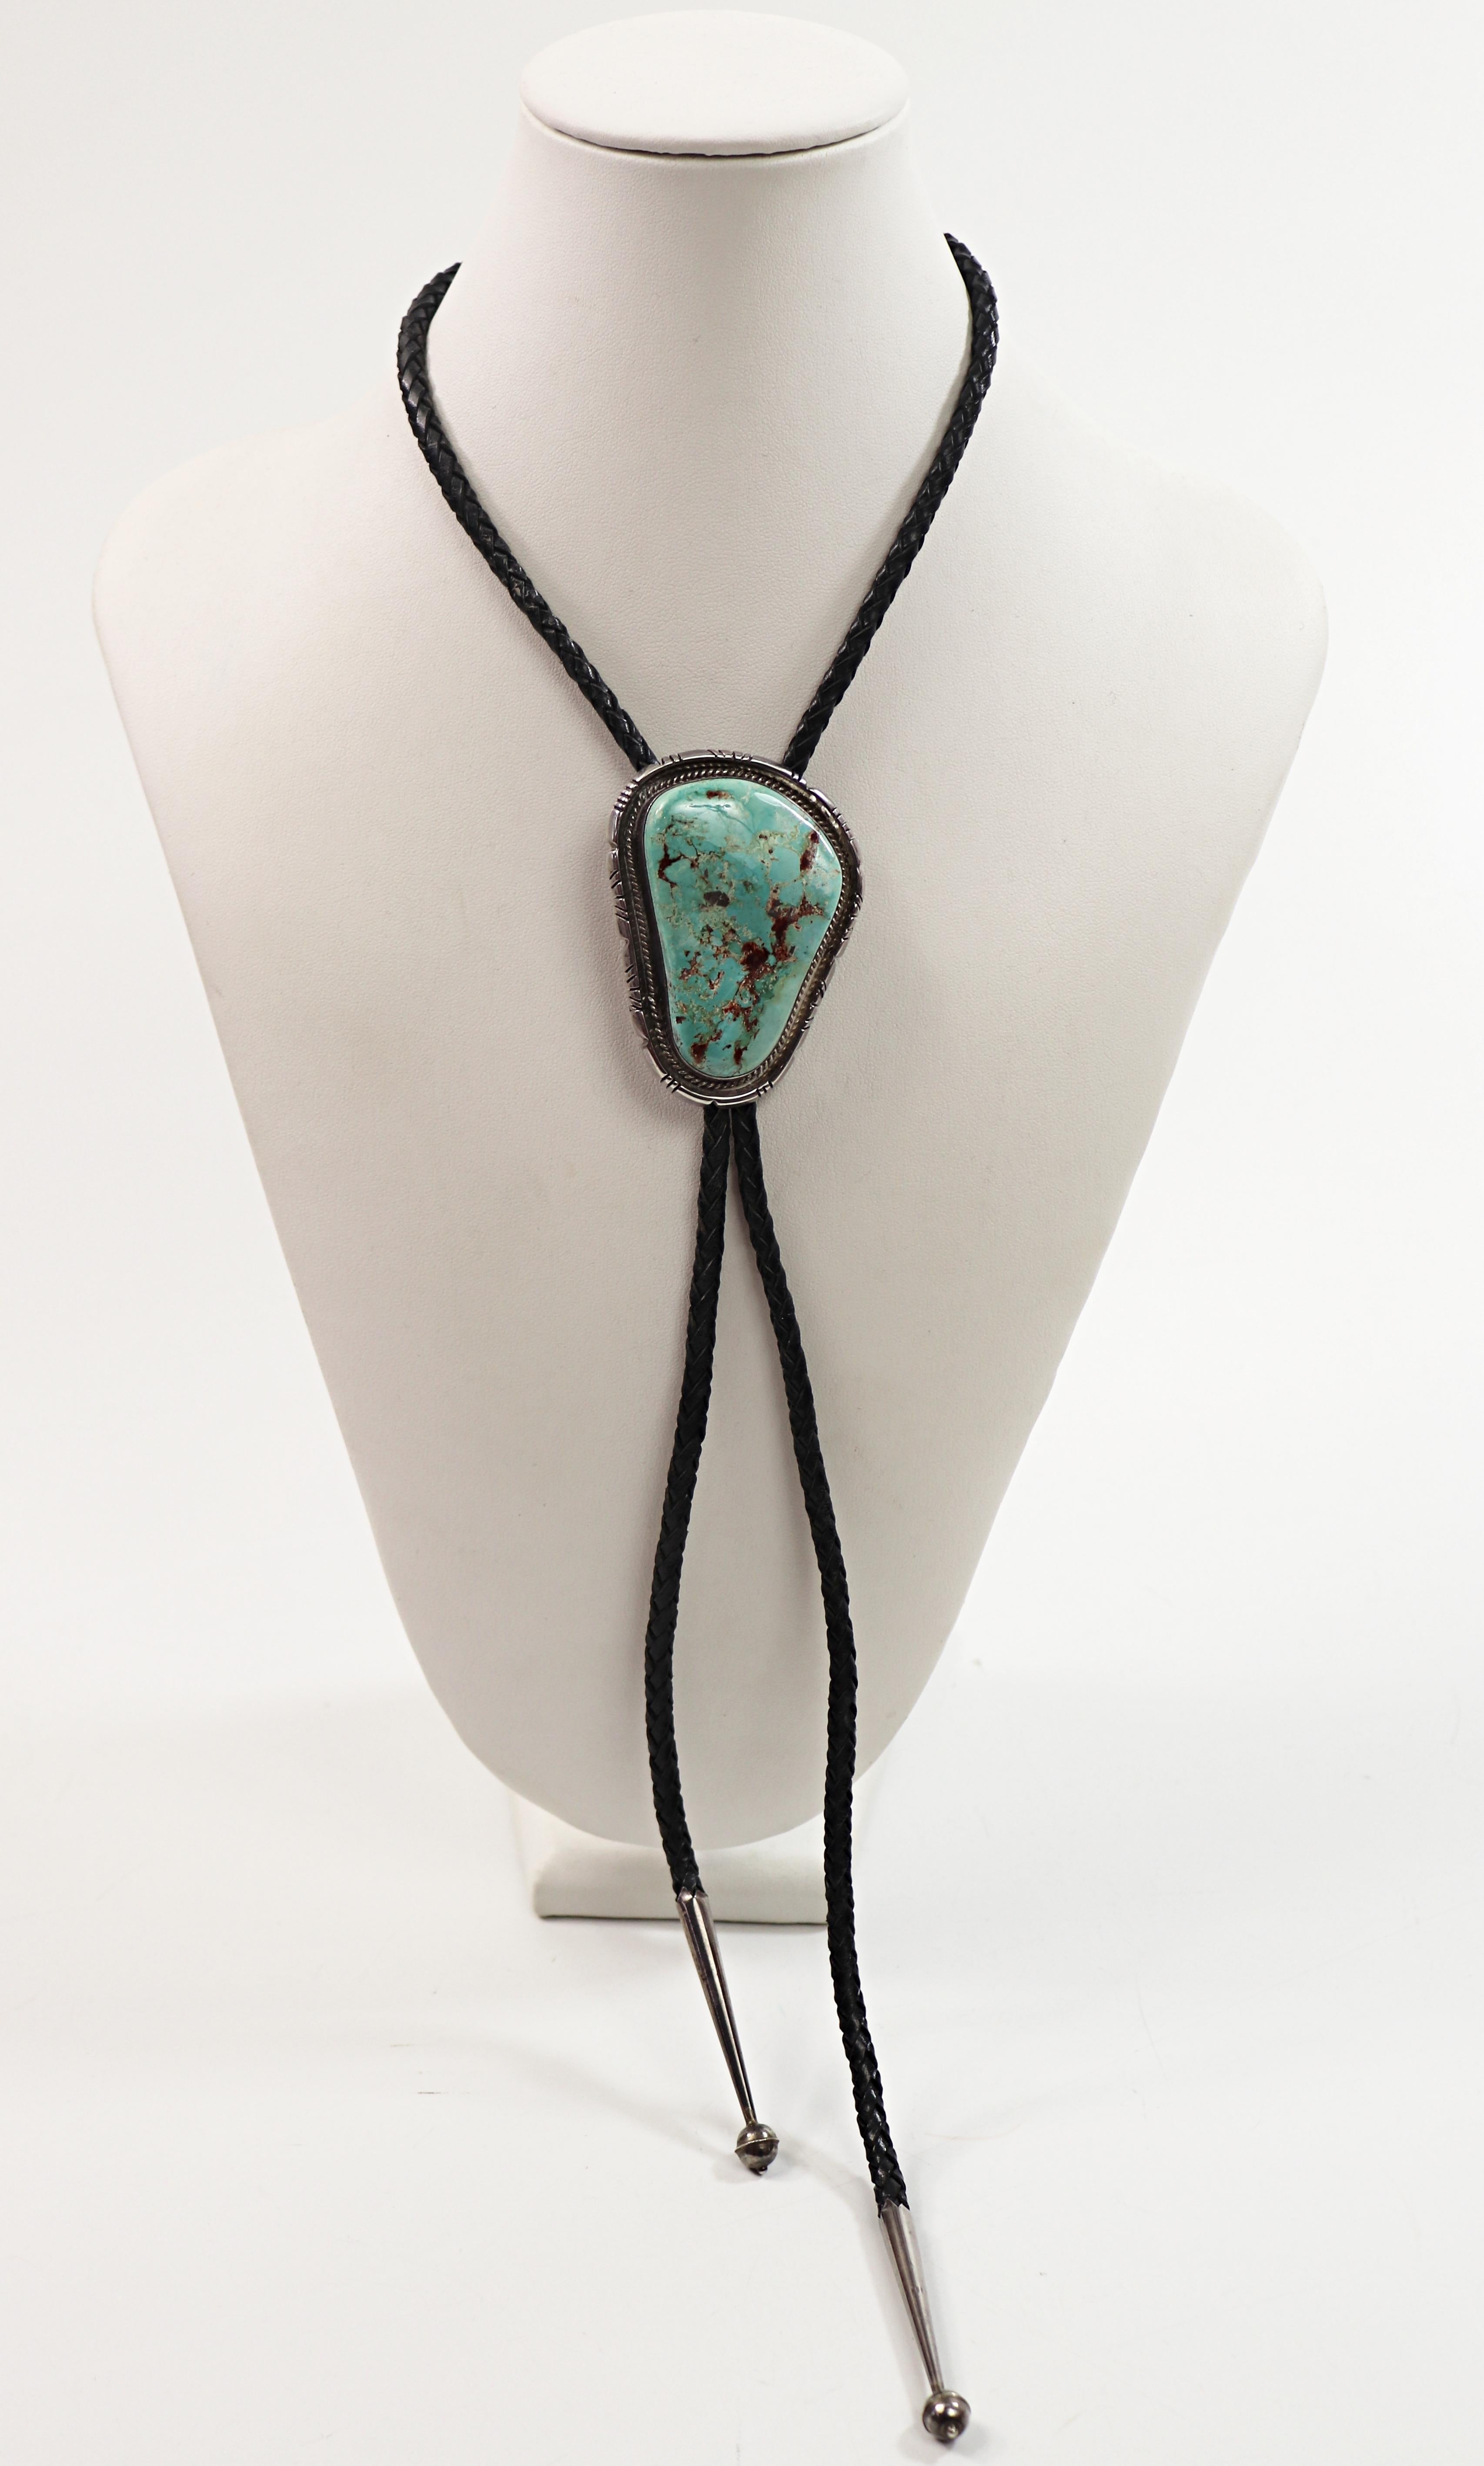 Featuring a beautiful blue turquoise in matrix (stabilized), 55 X 37 mm to
20.9 mm X 9.0 mm, set in a silver notched and wire twist frame mounting,
65.5 X 50.0 mm, with a fold over locking slide, suspended from a 4.5 mm
braided leather tie each end